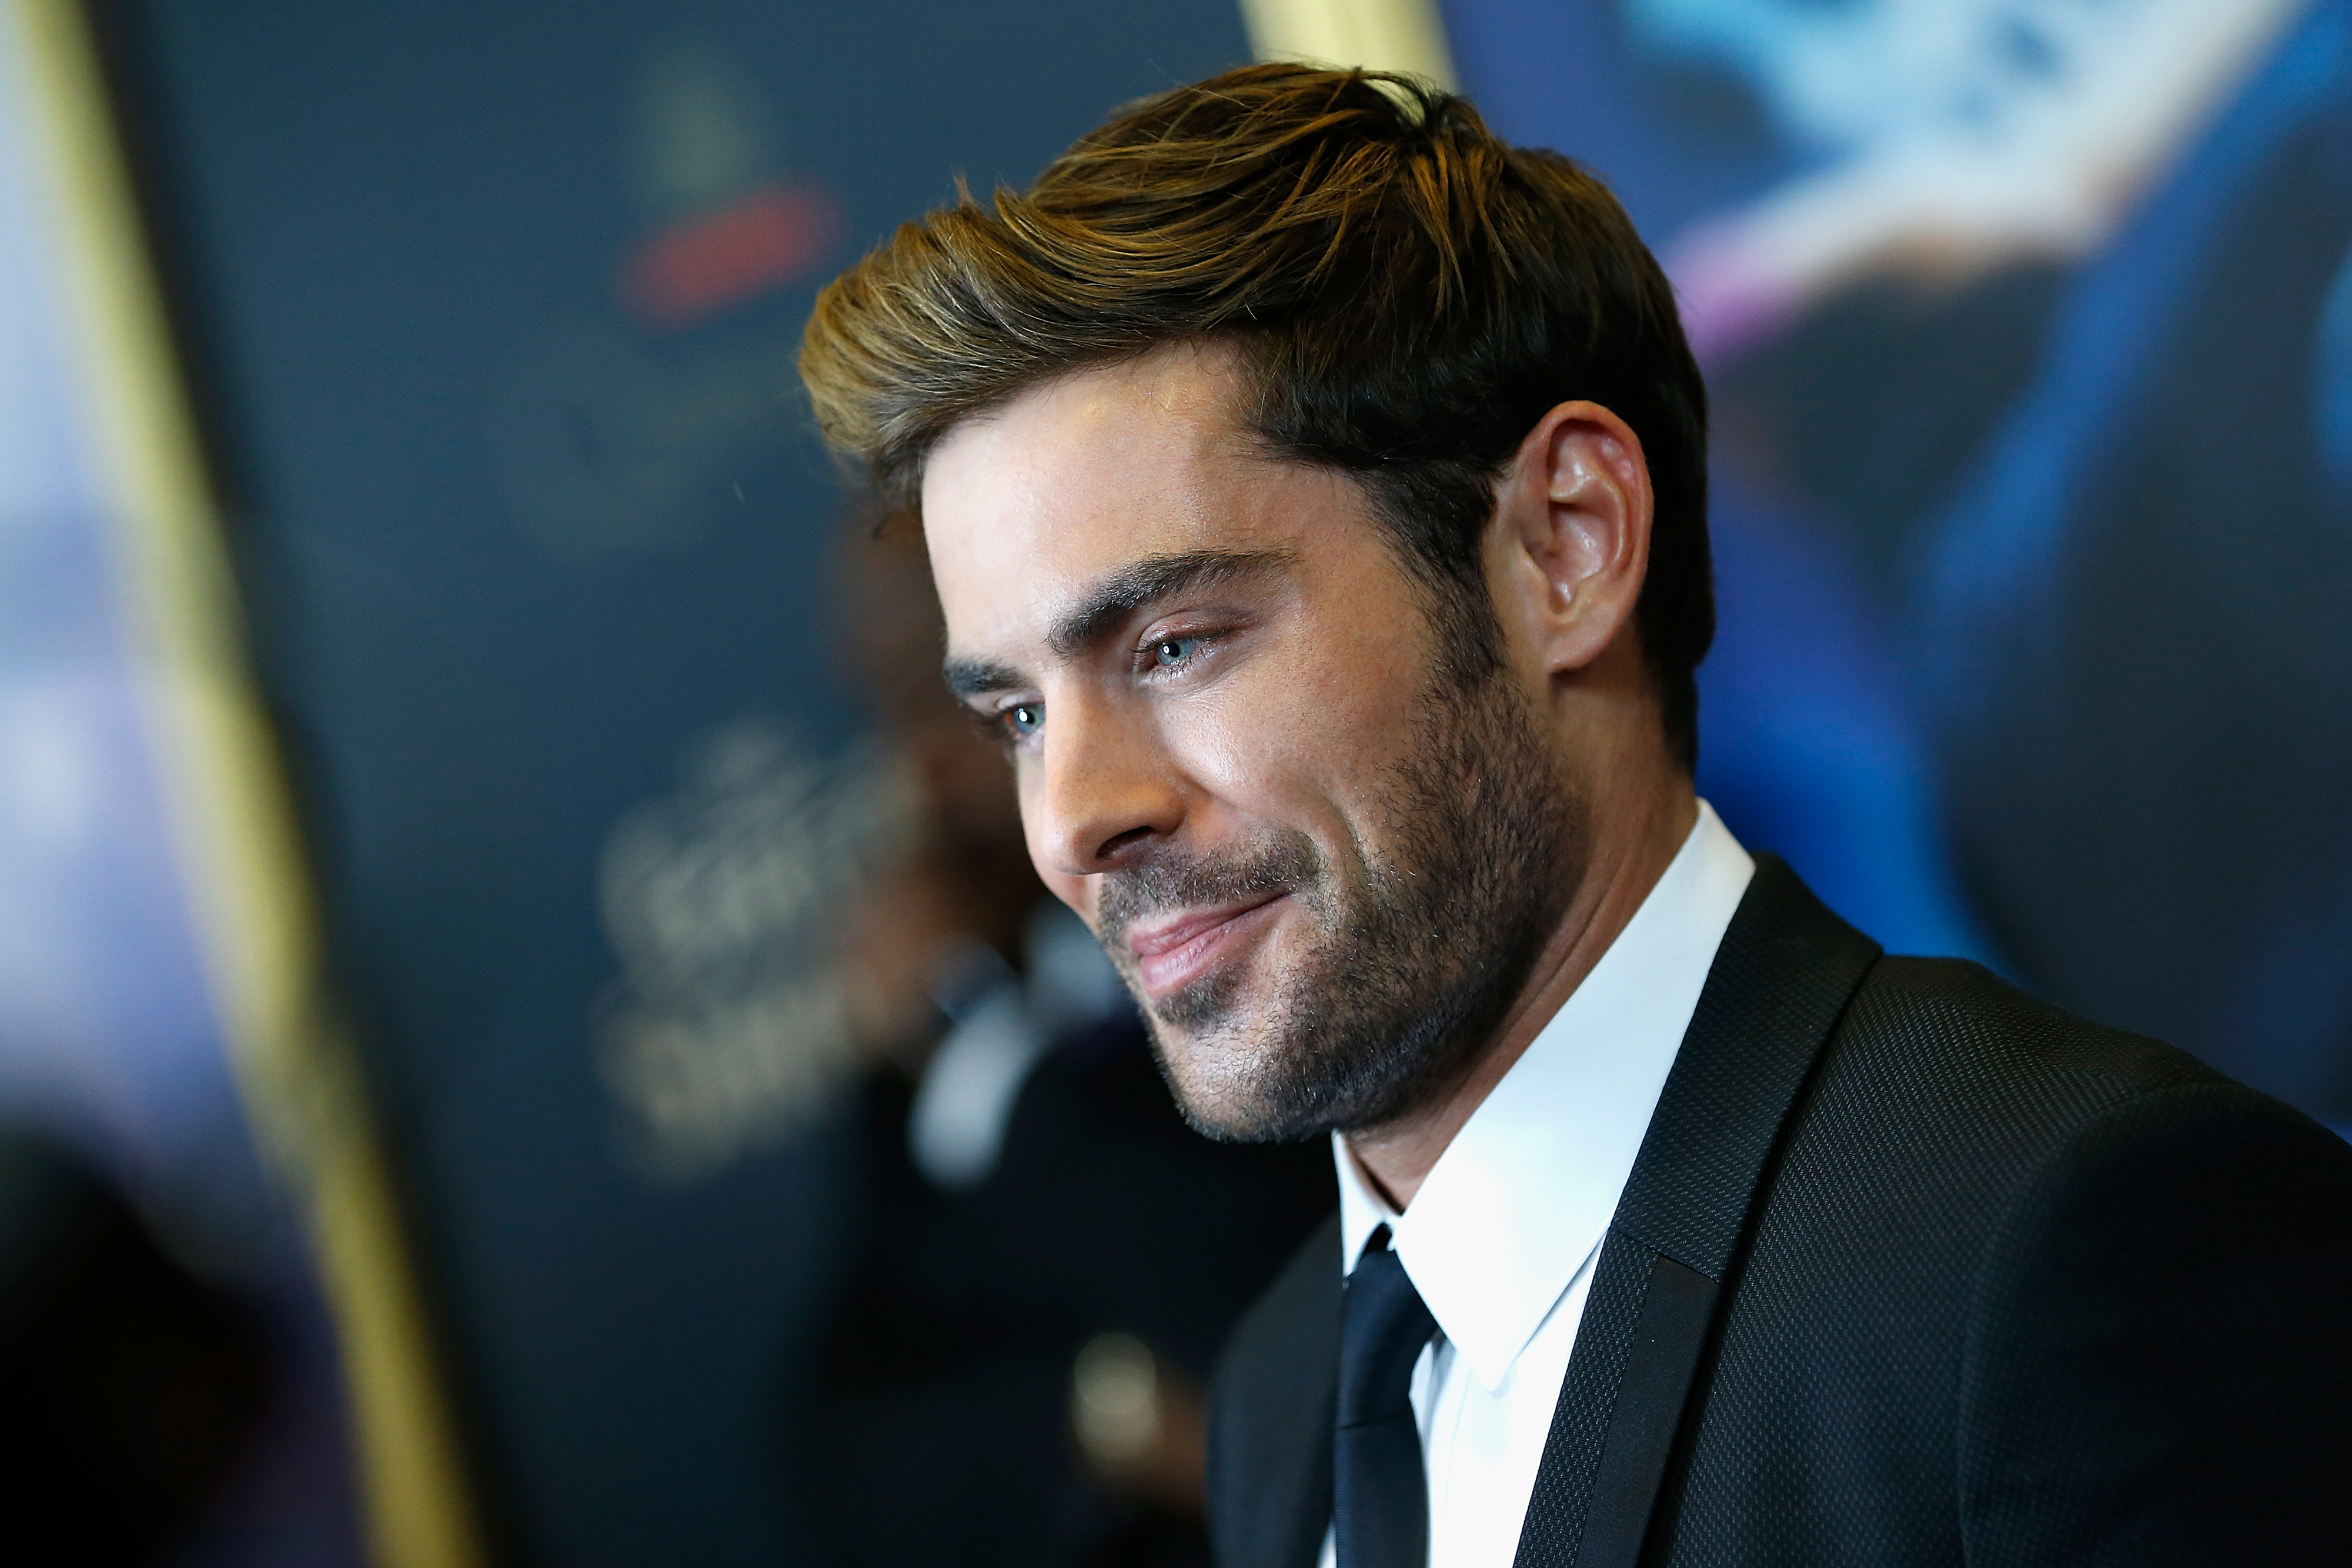 Close-up of Zac smiling in a suit and tie at a media event